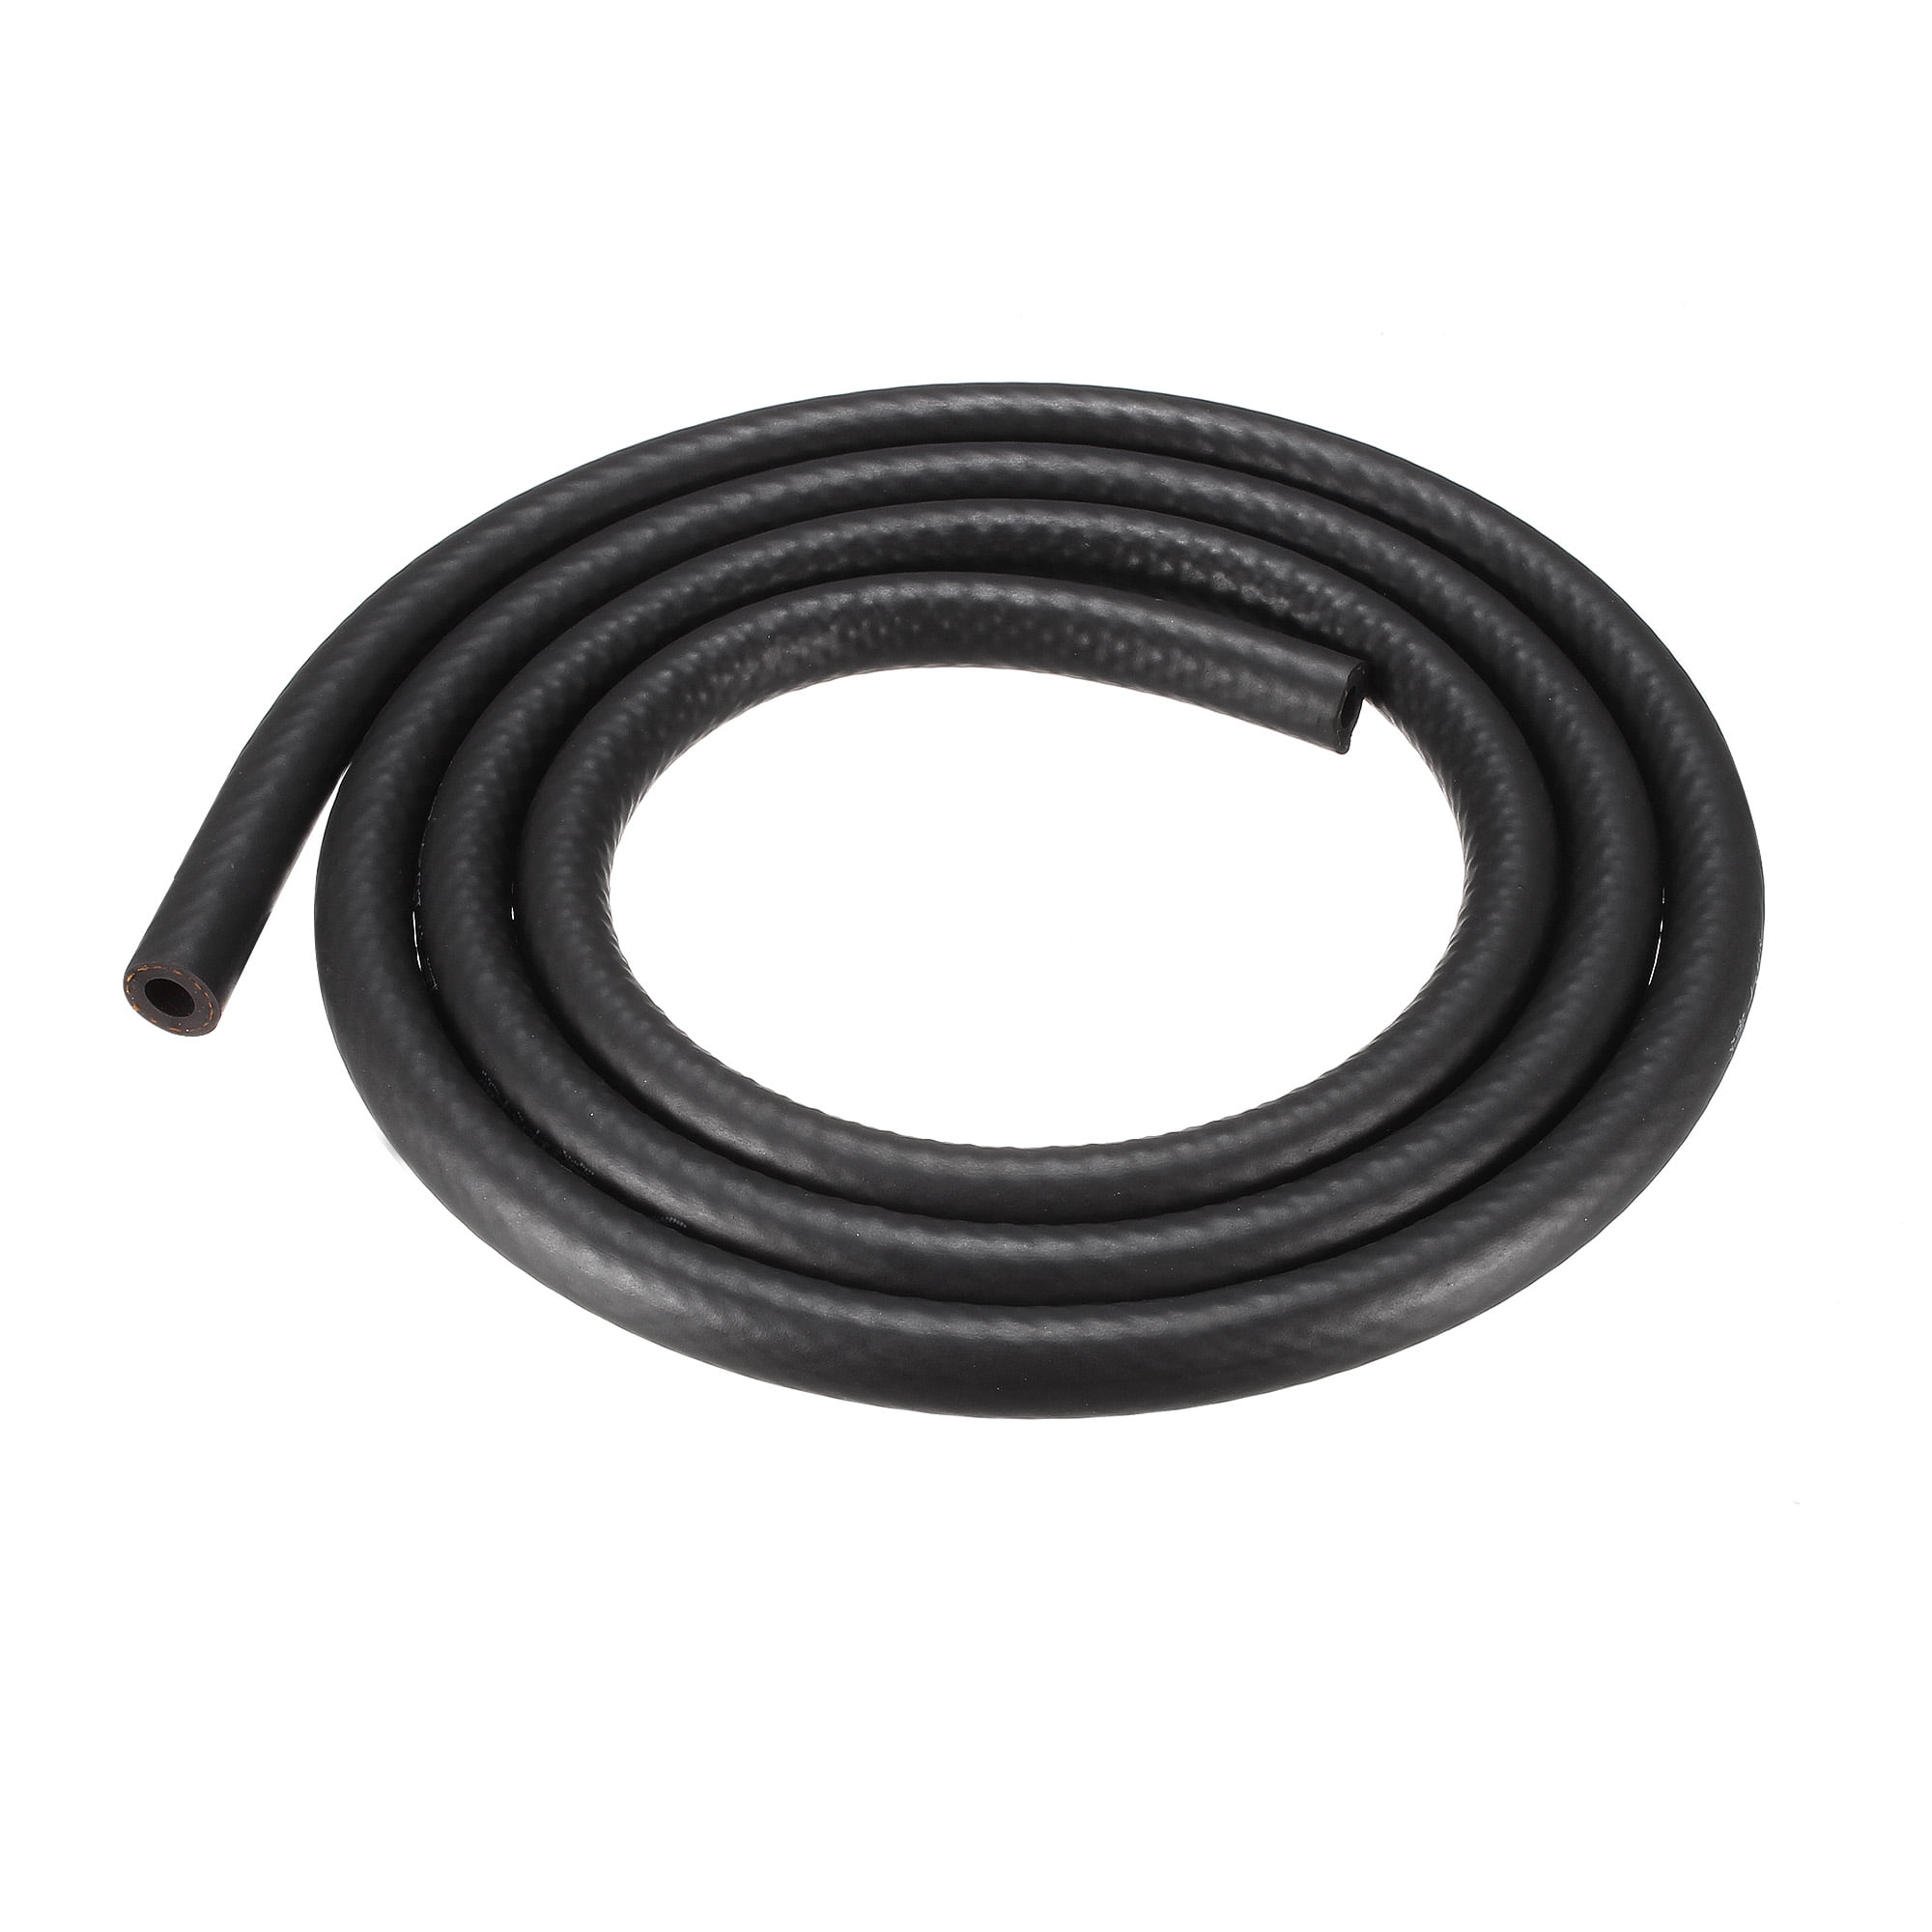 For Petrol Fuel Hose Pipe 5/16 ID 1x T Connector 1/4 Equal ID